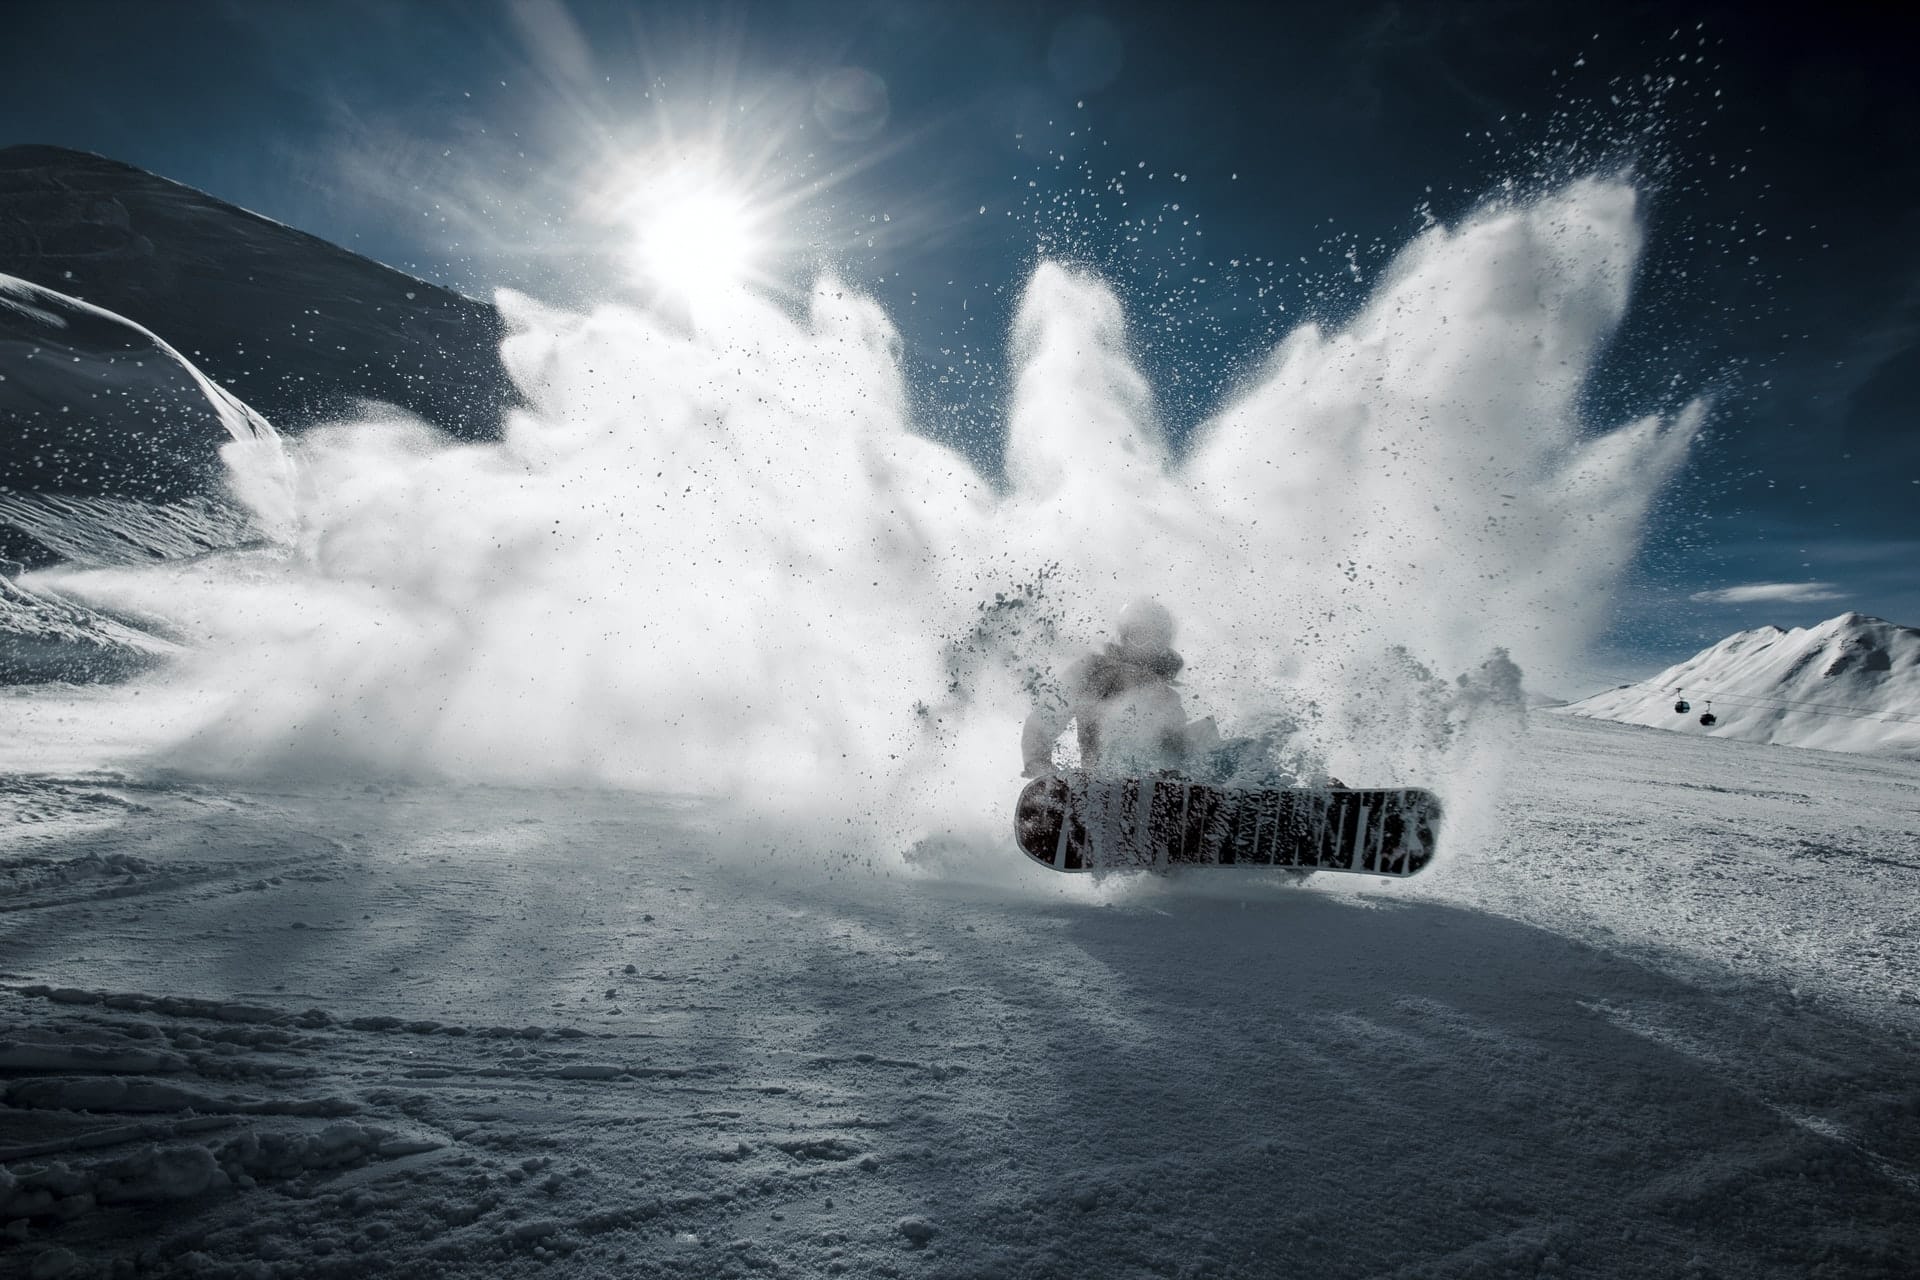 snowboarding - sports photography guide